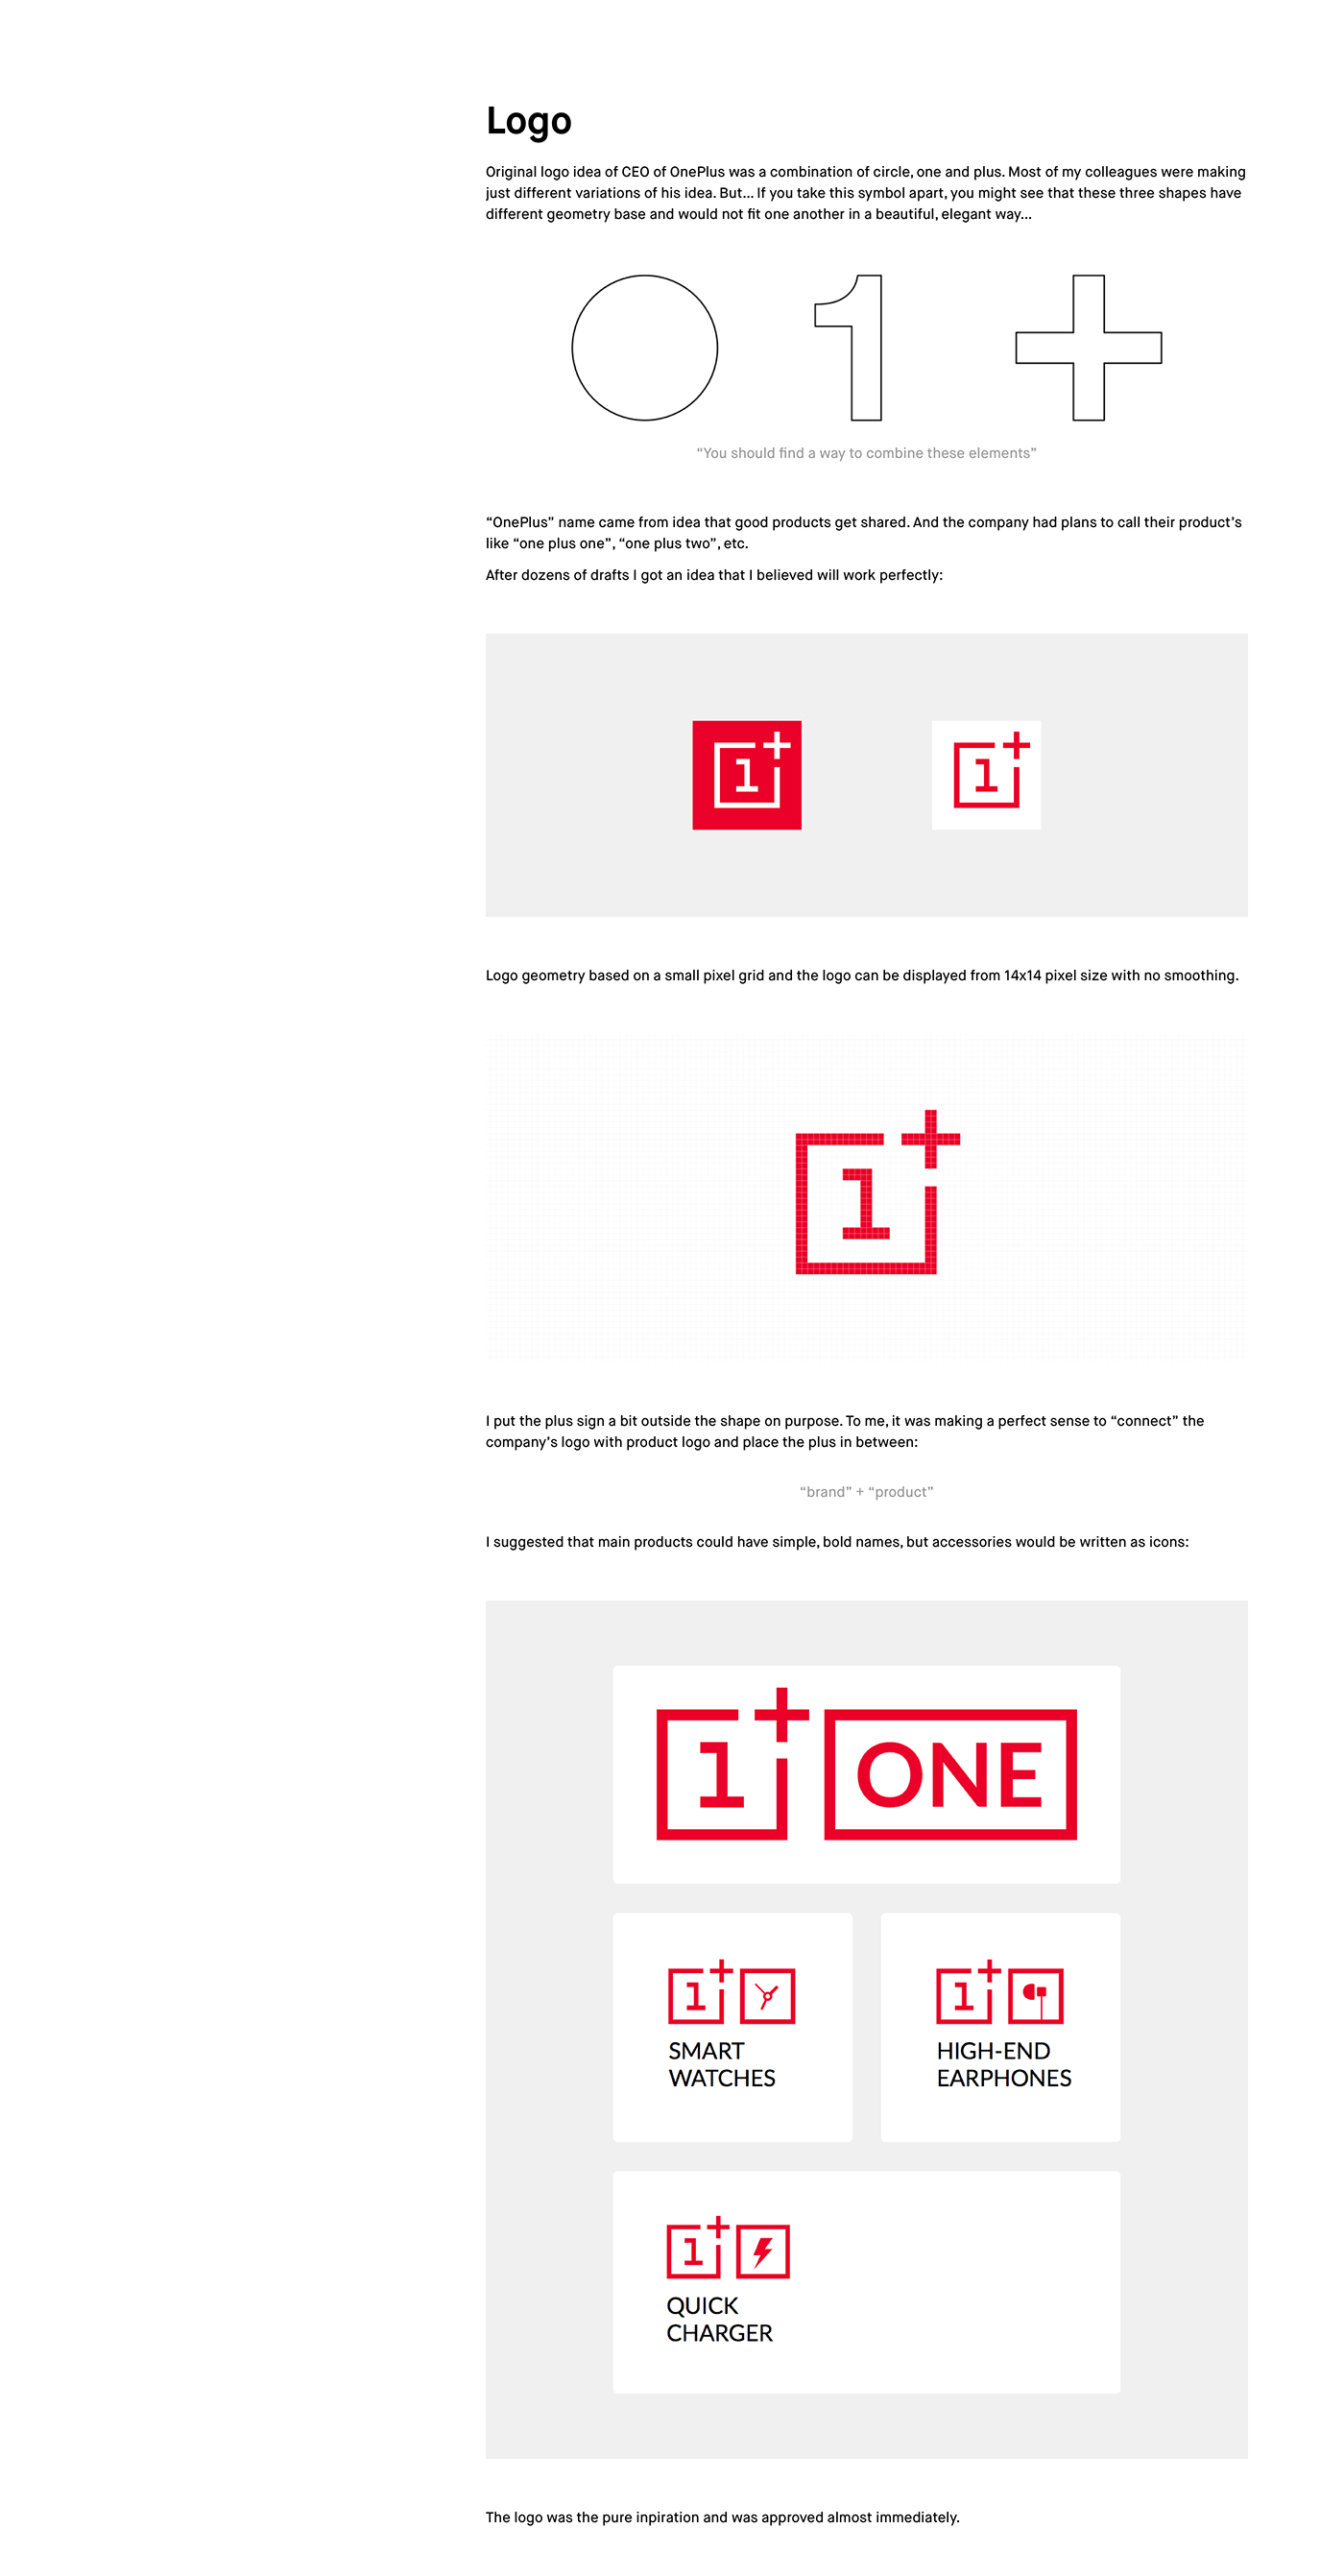 Plus Sign Company Logo - Logo & Identity for OnePlus Android Smartphone brand